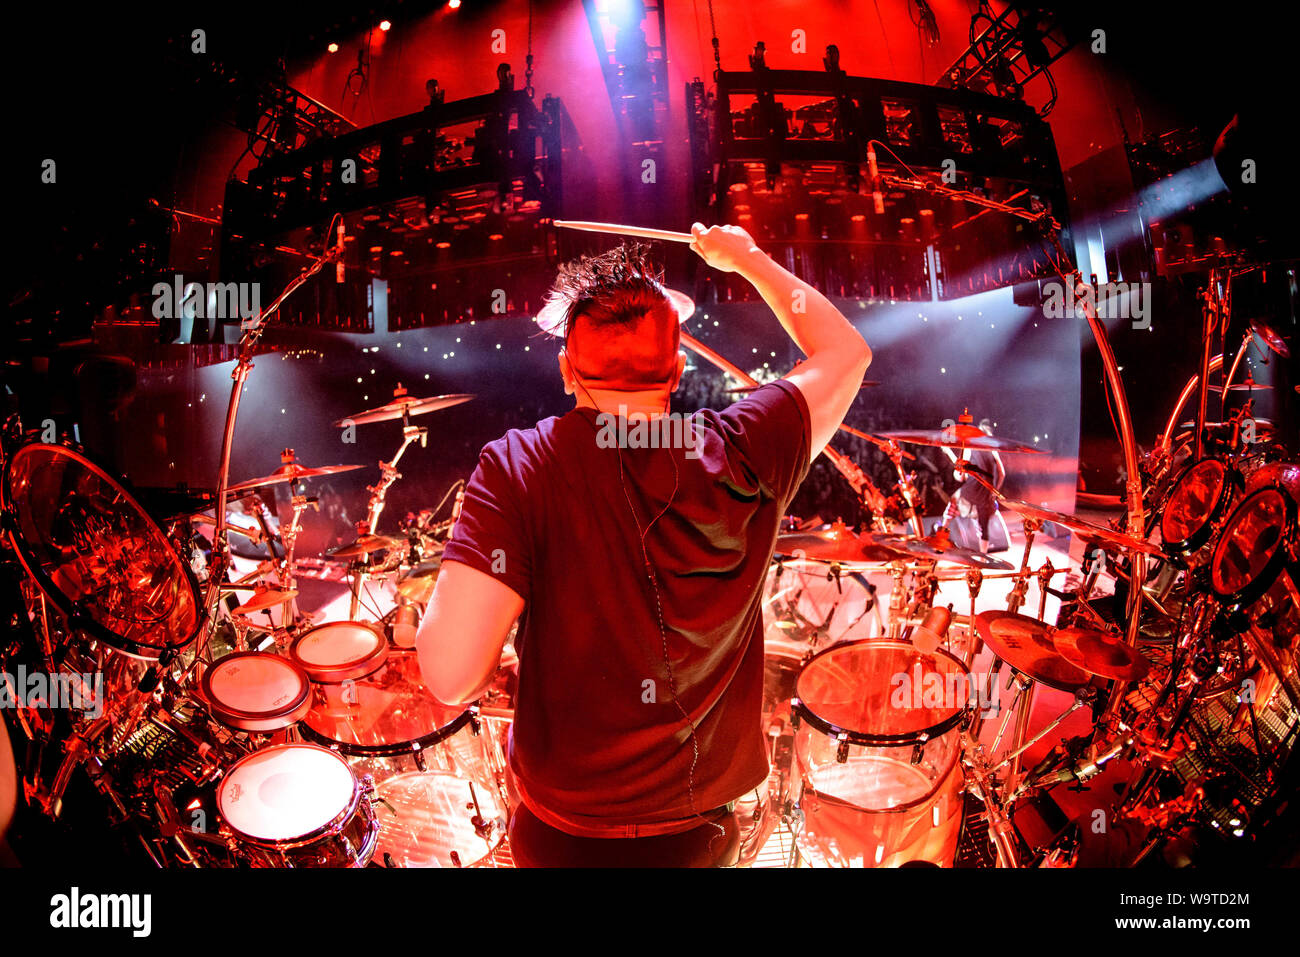 August toronto ontario canada drummer ray luzier of an american nu metal band korn performs at budweiser stage in toronto credit image igor vidyashevzuma wire stock photo